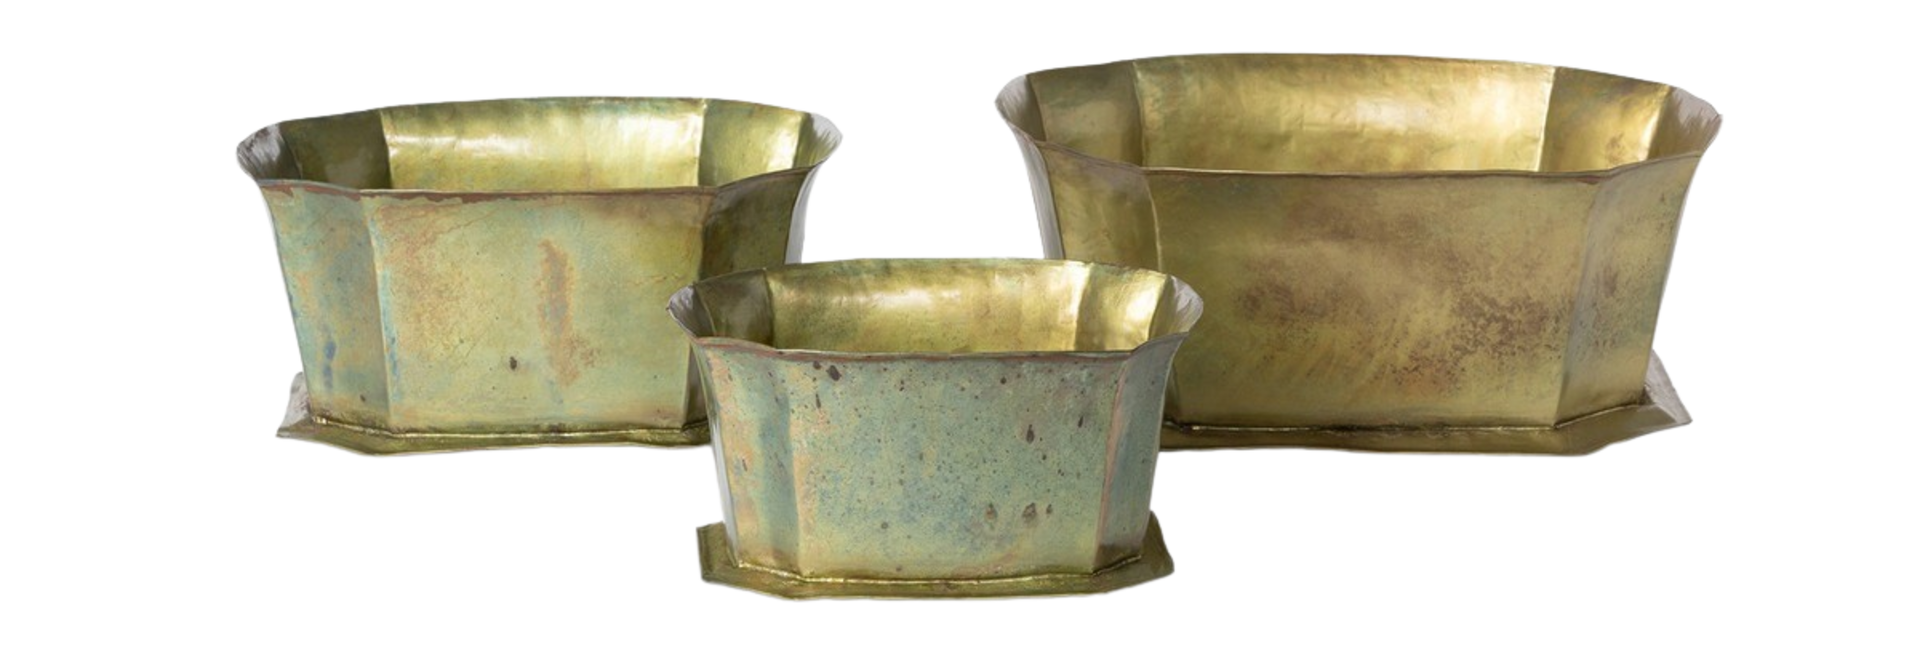 Conservatory | The Planter Collection, Patina Bronze - 13 Inch x 11 Inch x 5.75 Inch